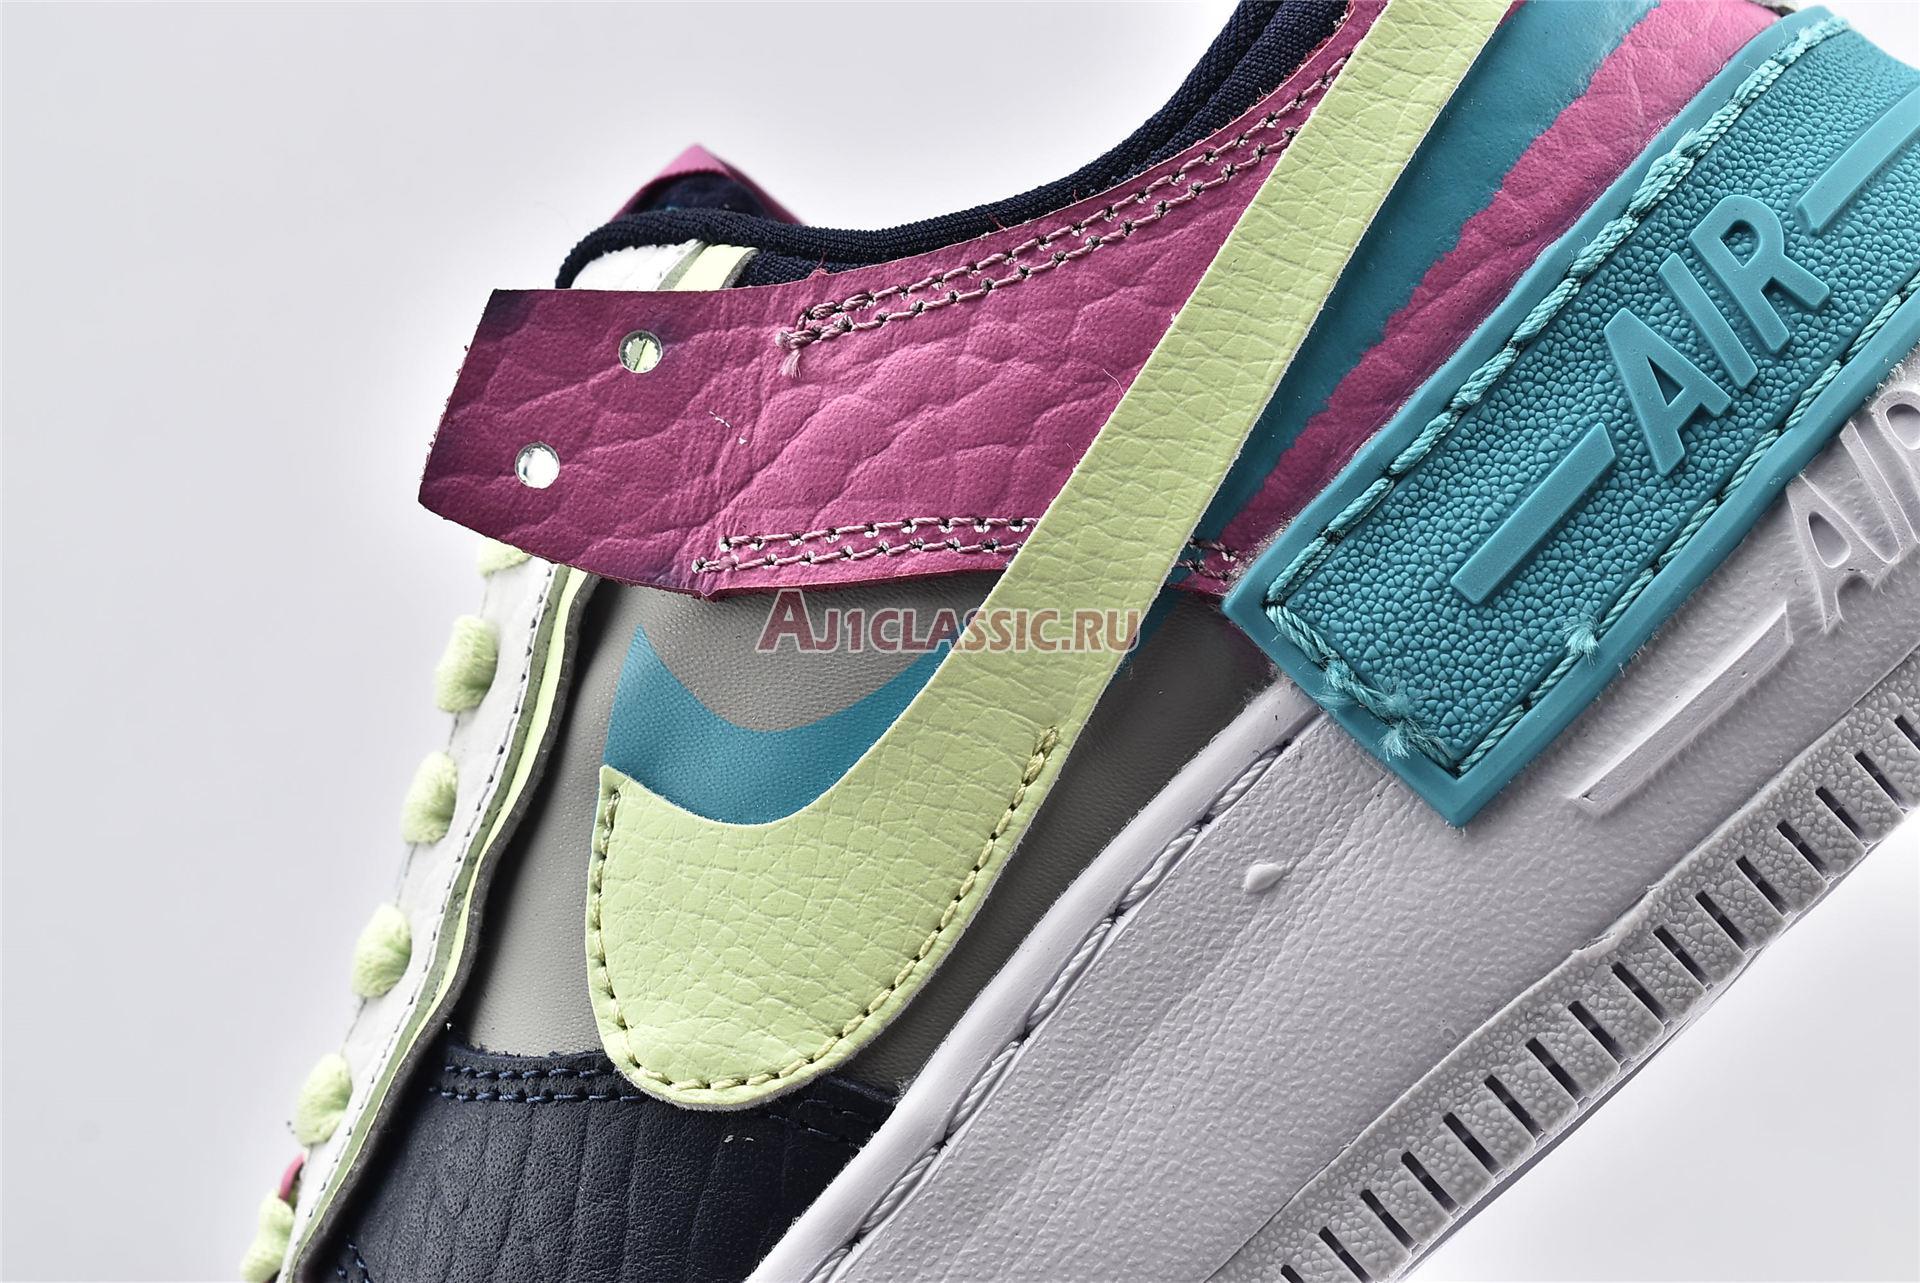 Nike Wmns Air Force 1 Shadow "Multi-Color" CK3172-001